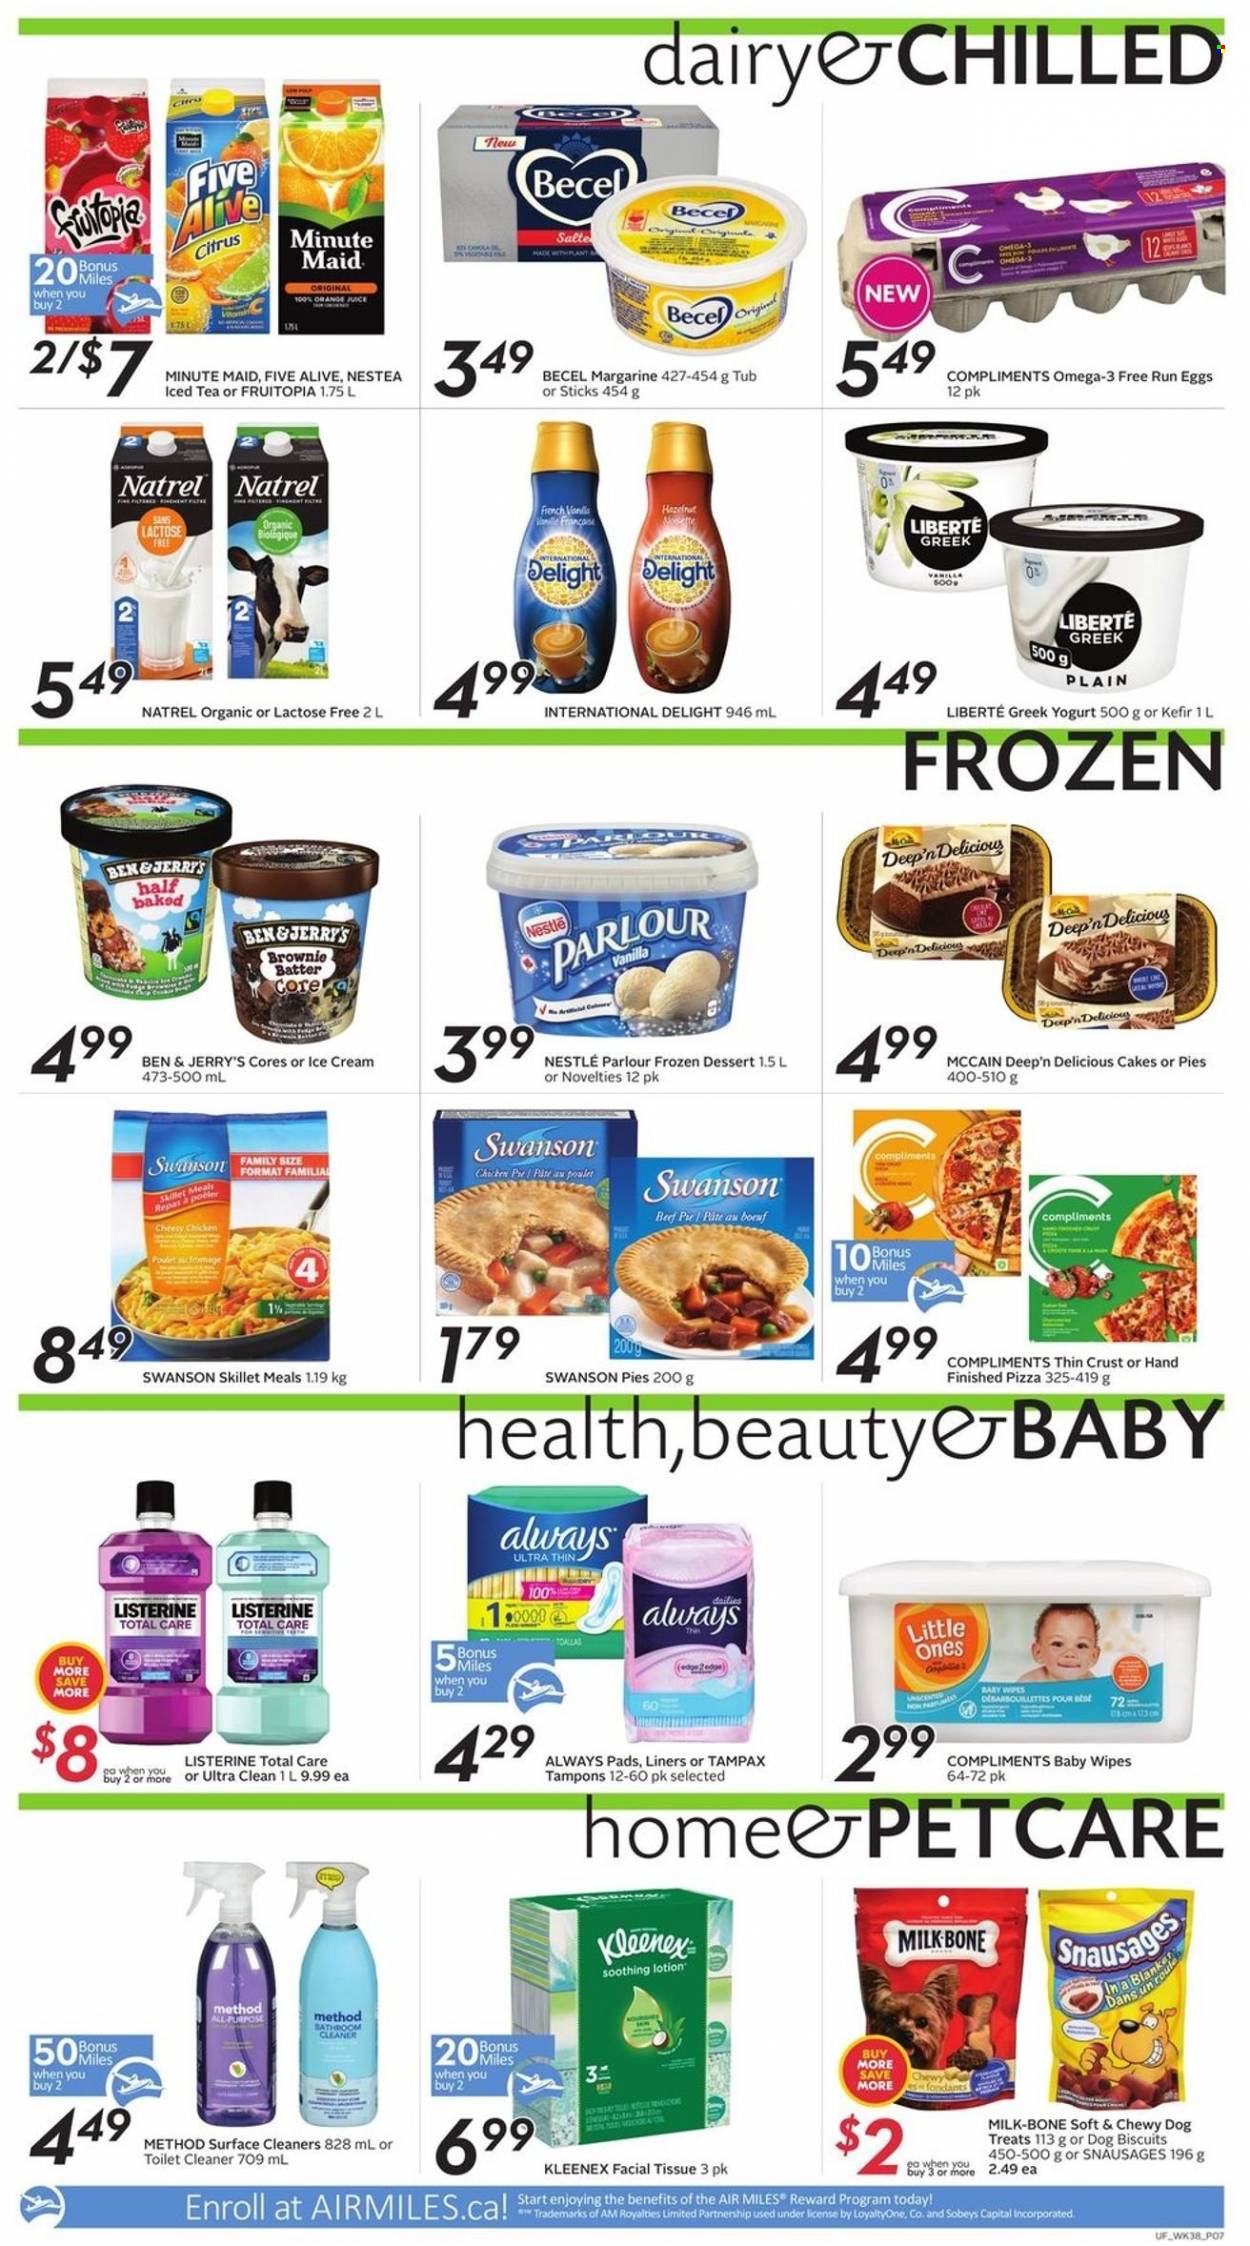 thumbnail - Sobeys Urban Fresh Flyer - January 13, 2022 - January 19, 2022 - Sales products - cake, pizza, greek yoghurt, yoghurt, milk, kefir, eggs, margarine, ice cream, Ben & Jerry's, McCain, ice tea, fruit punch, wipes, baby wipes, Kleenex, tissues, cleaner, toilet cleaner, Always pads, tampons, body lotion, animal treats, dog food, dog biscuits, Omega-3, Nestlé, Listerine, Tampax. Page 7.